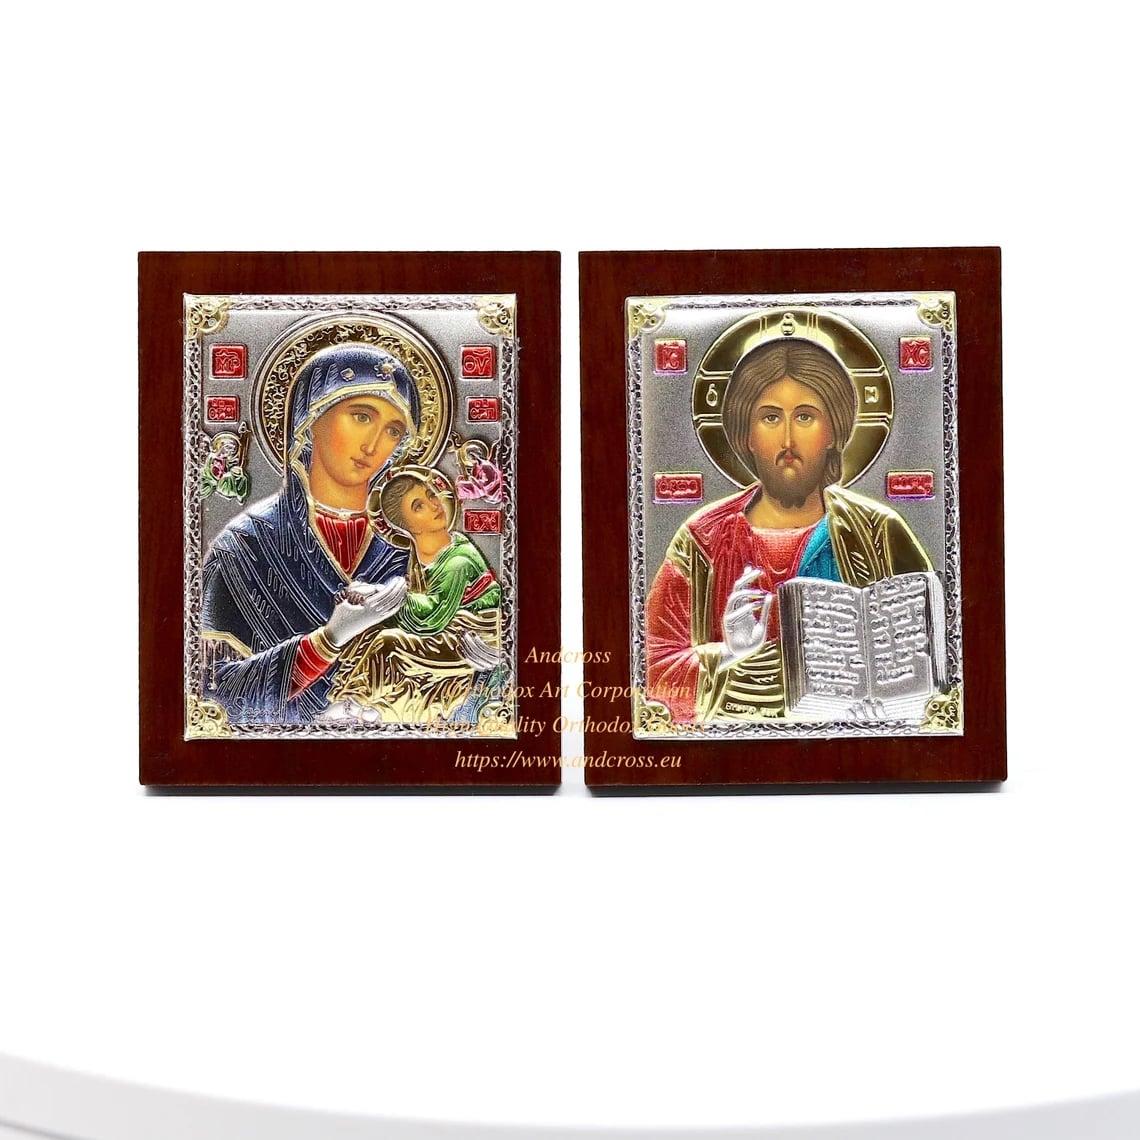 SilverPlated.999 Orthodox Icons Mother of God Amolyntos